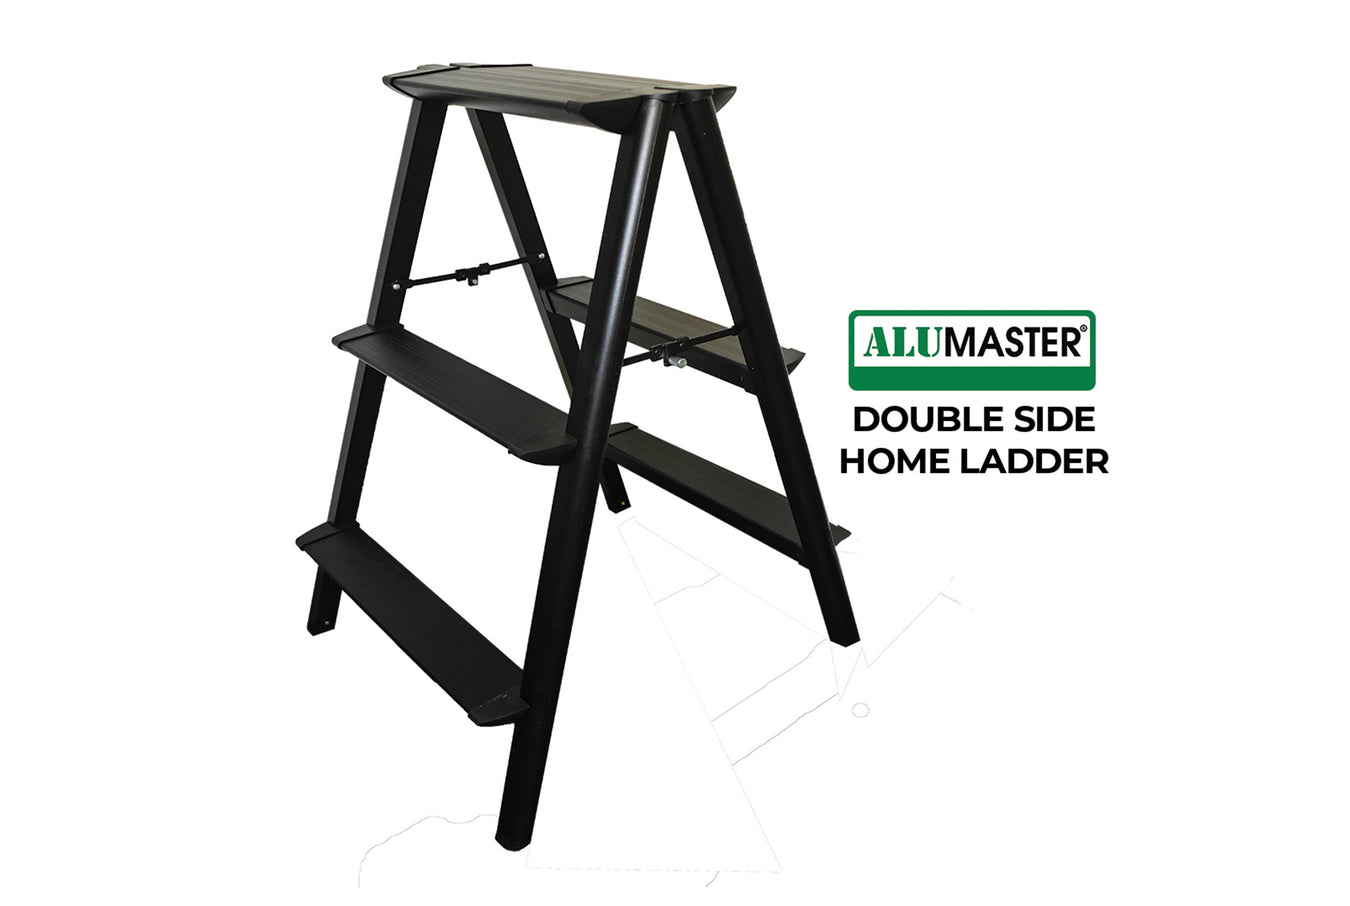 Alumaster Double Side Home Ladder